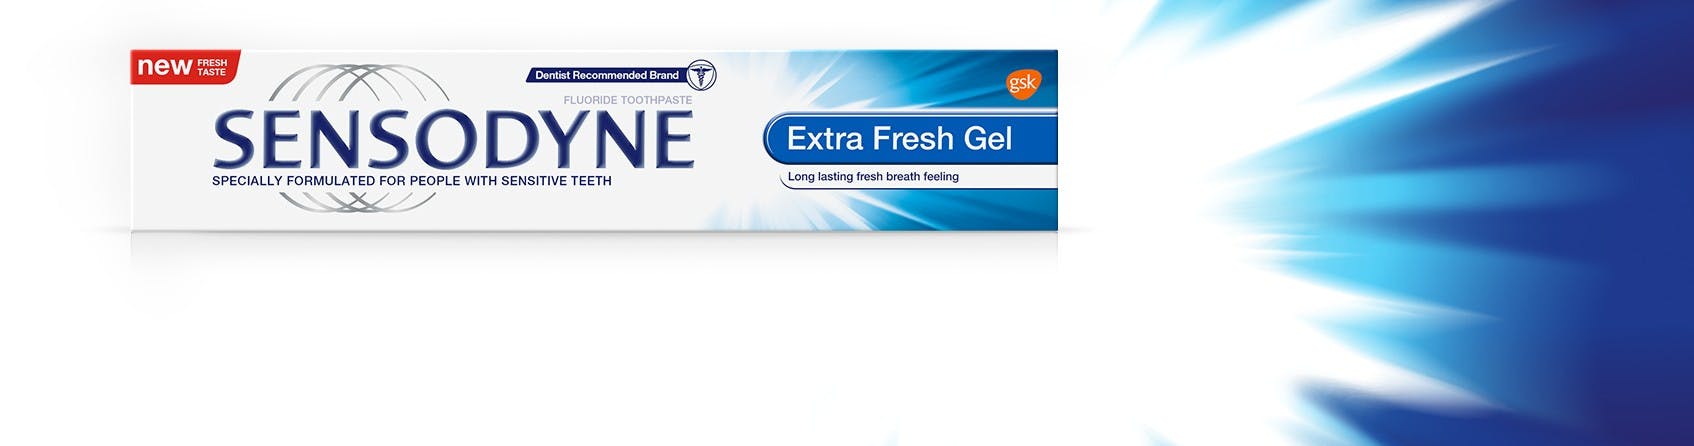 Sensitivity relief with long lasting fresh breath feeling imagery